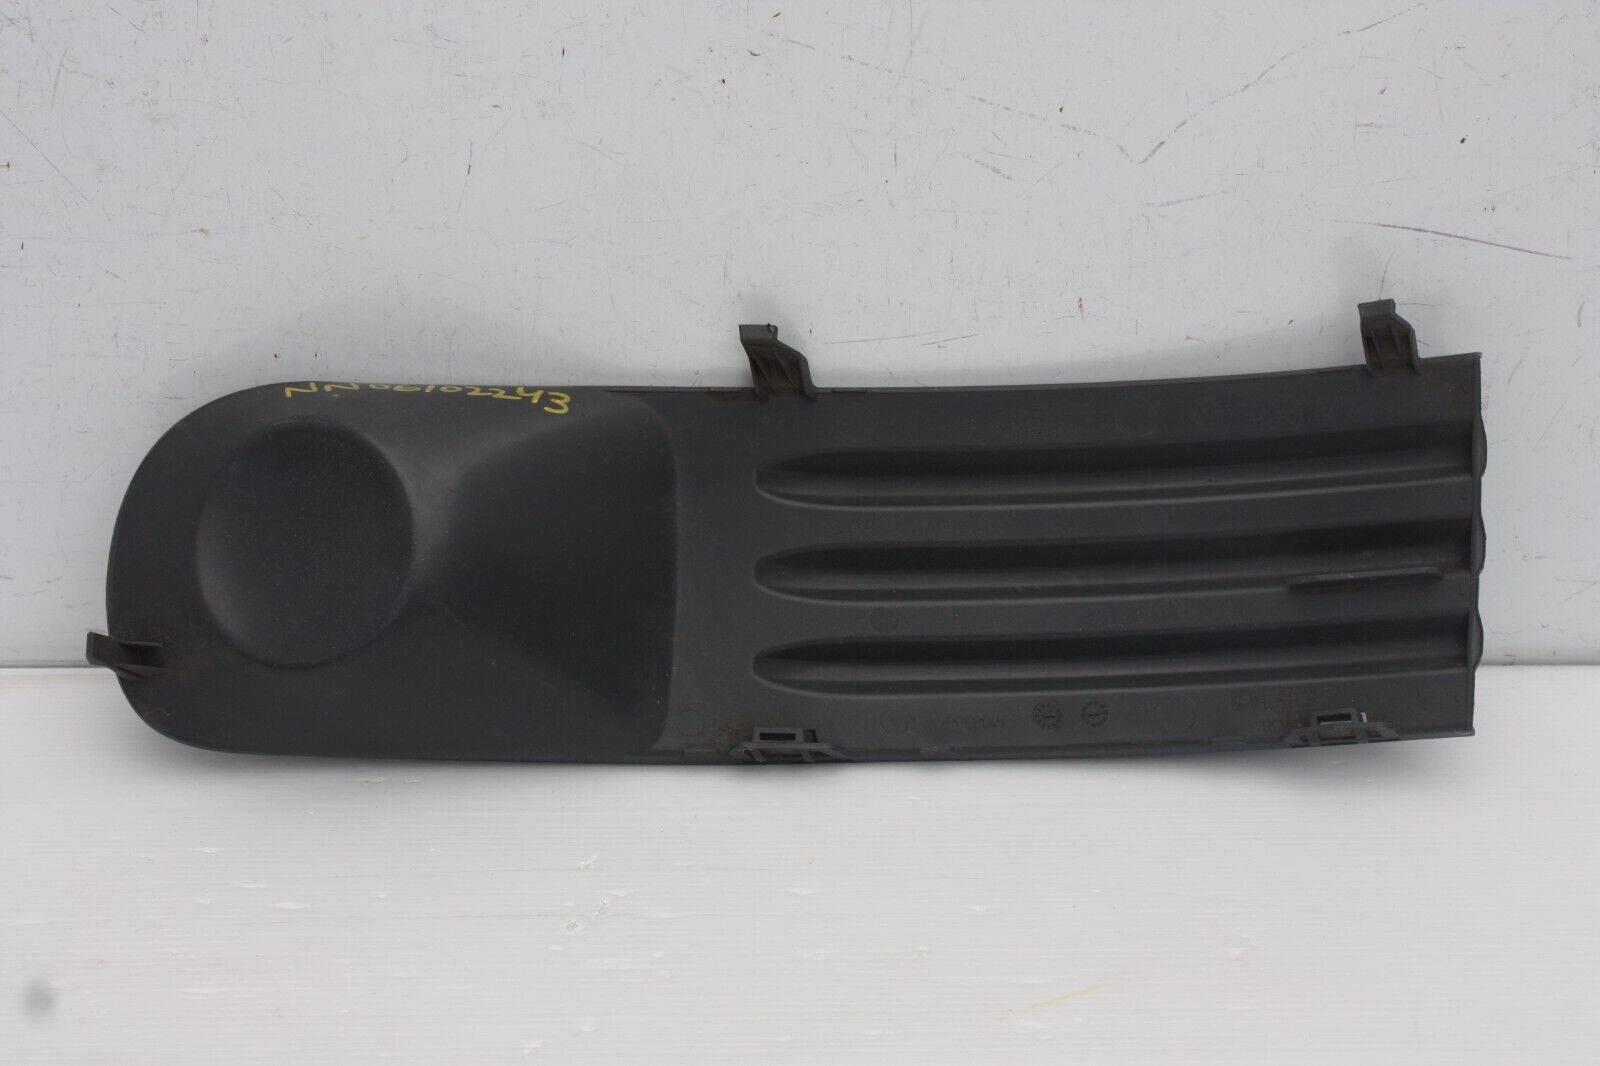 VW-Transporter-Front-Bumper-Right-Grill-Trim-2004-to-2009-7H0807490C-Genuine-176029790443-7